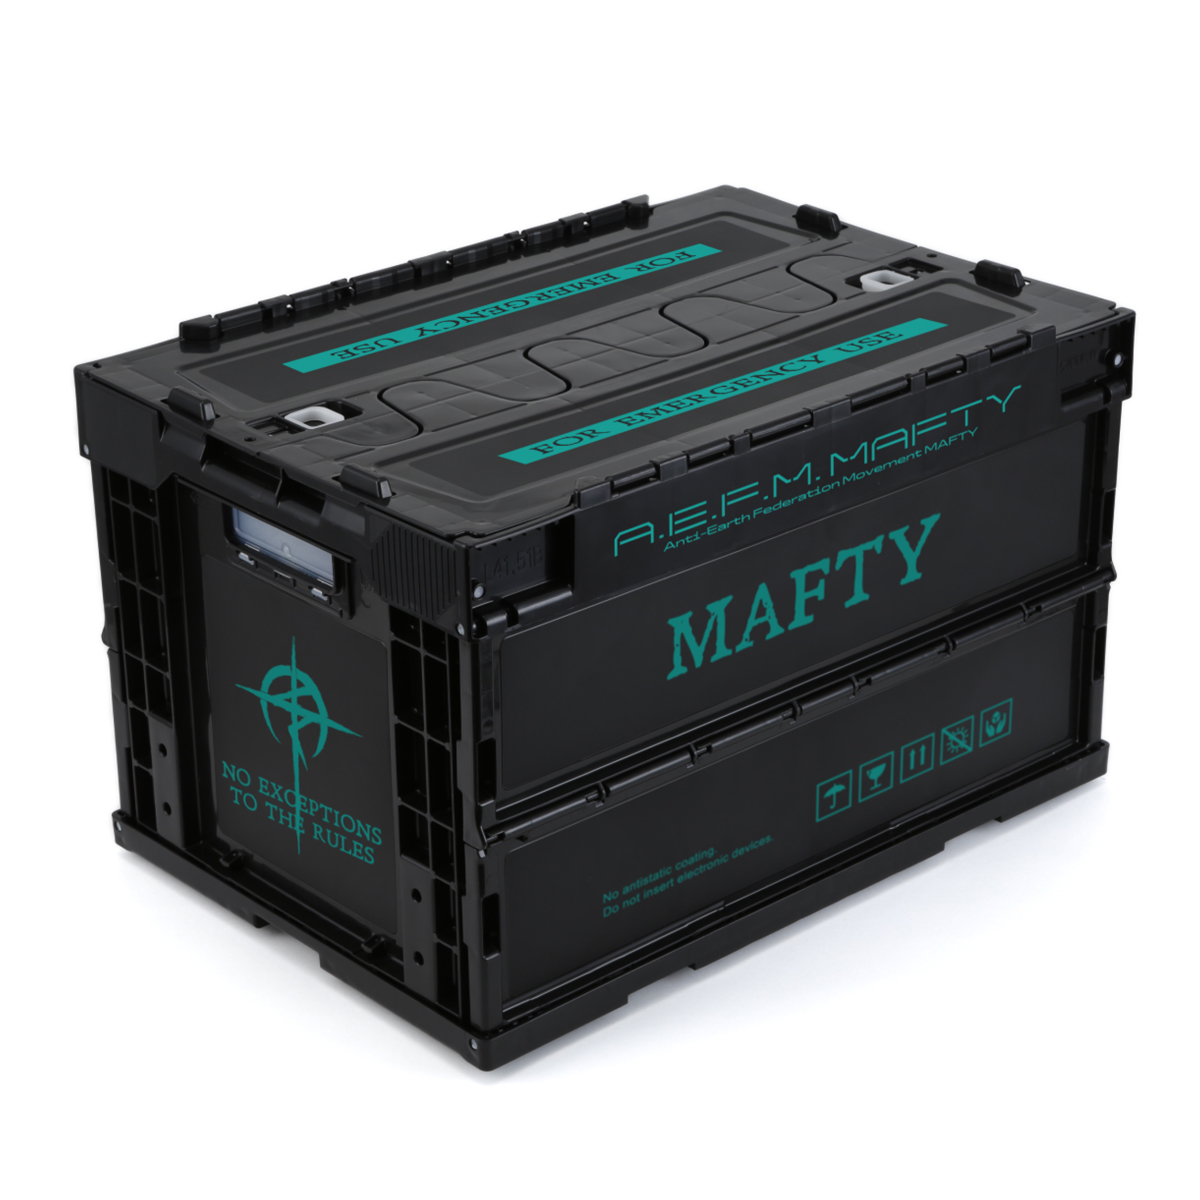 MOBILE SUIT GUNDAM HATHAWAY MAFTY FOLDING CONTAINER